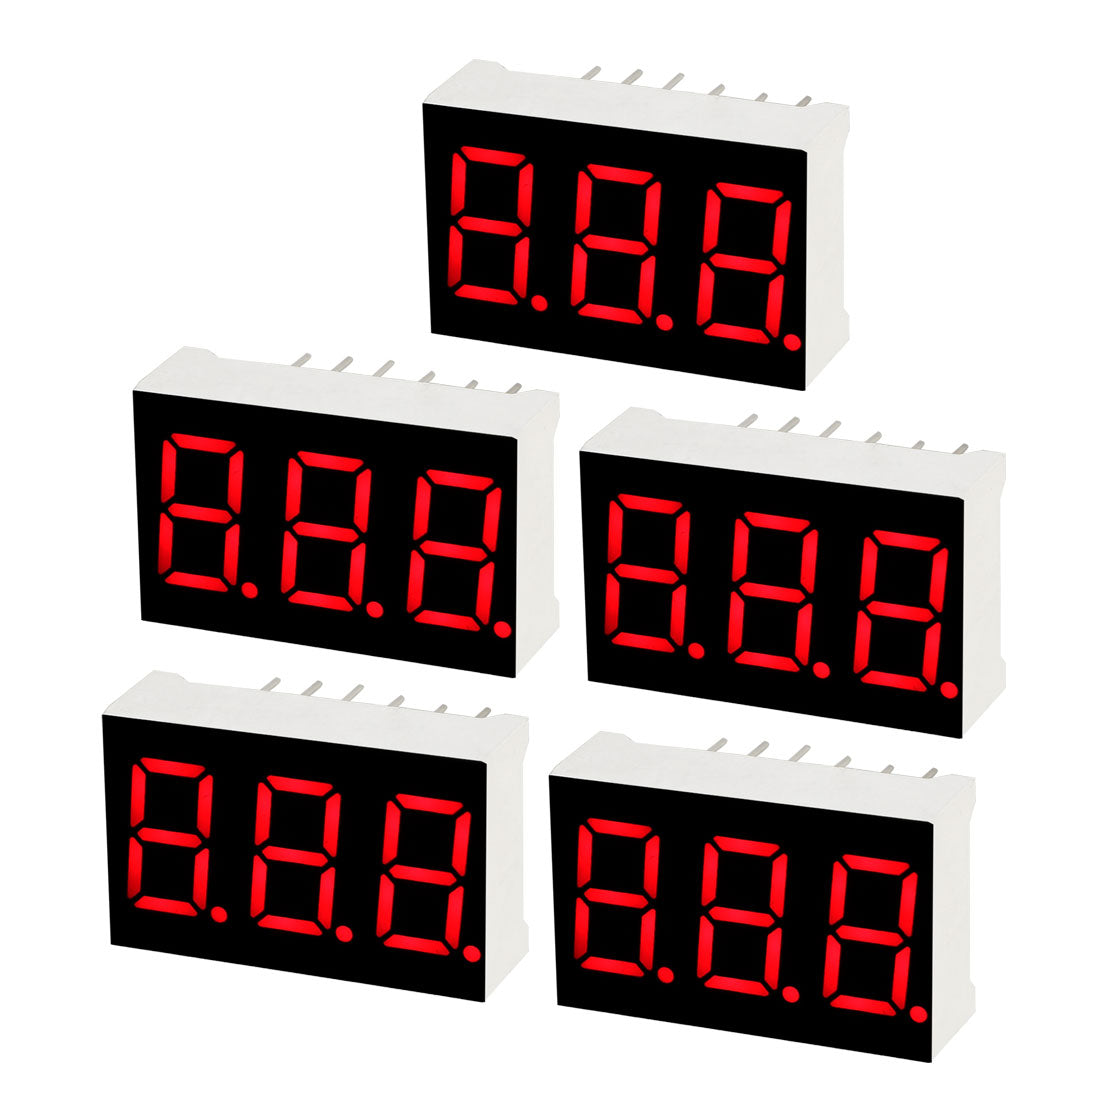 uxcell Uxcell Common Cathode 11 Pin 3 Bit 7 Segment 0.89 x 0.55 x 0.28 Inch 0.35" Red LED Display Digital Tube 5pcs